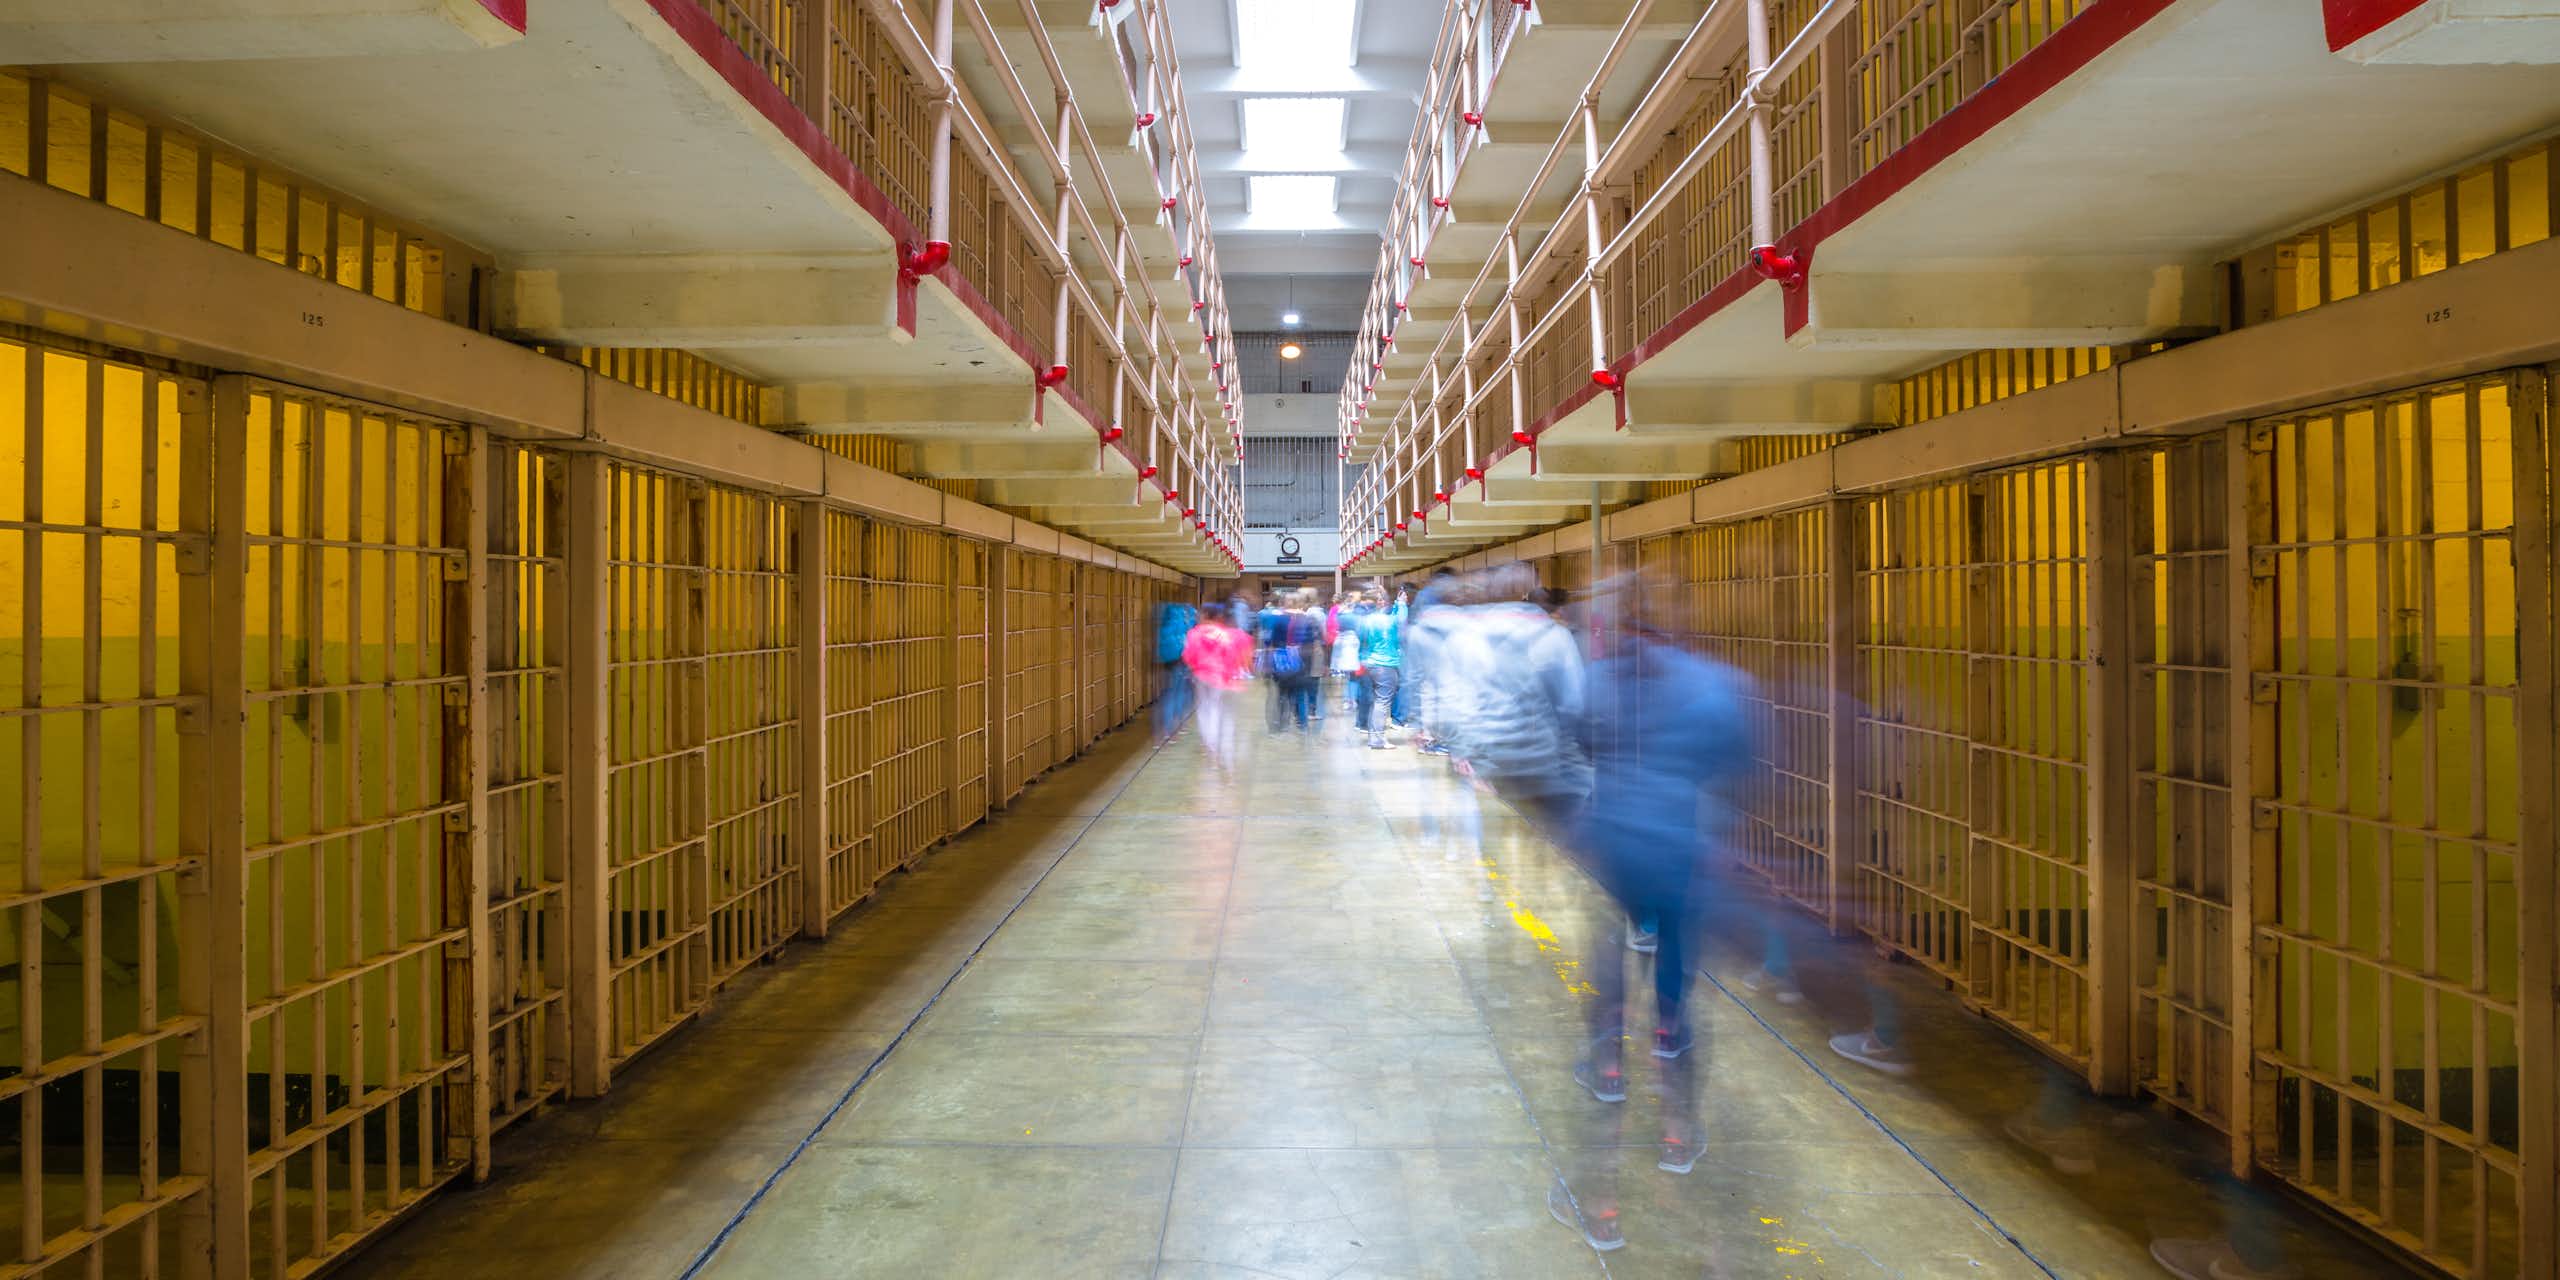 A hall of prison cells with blurred people moving throughout